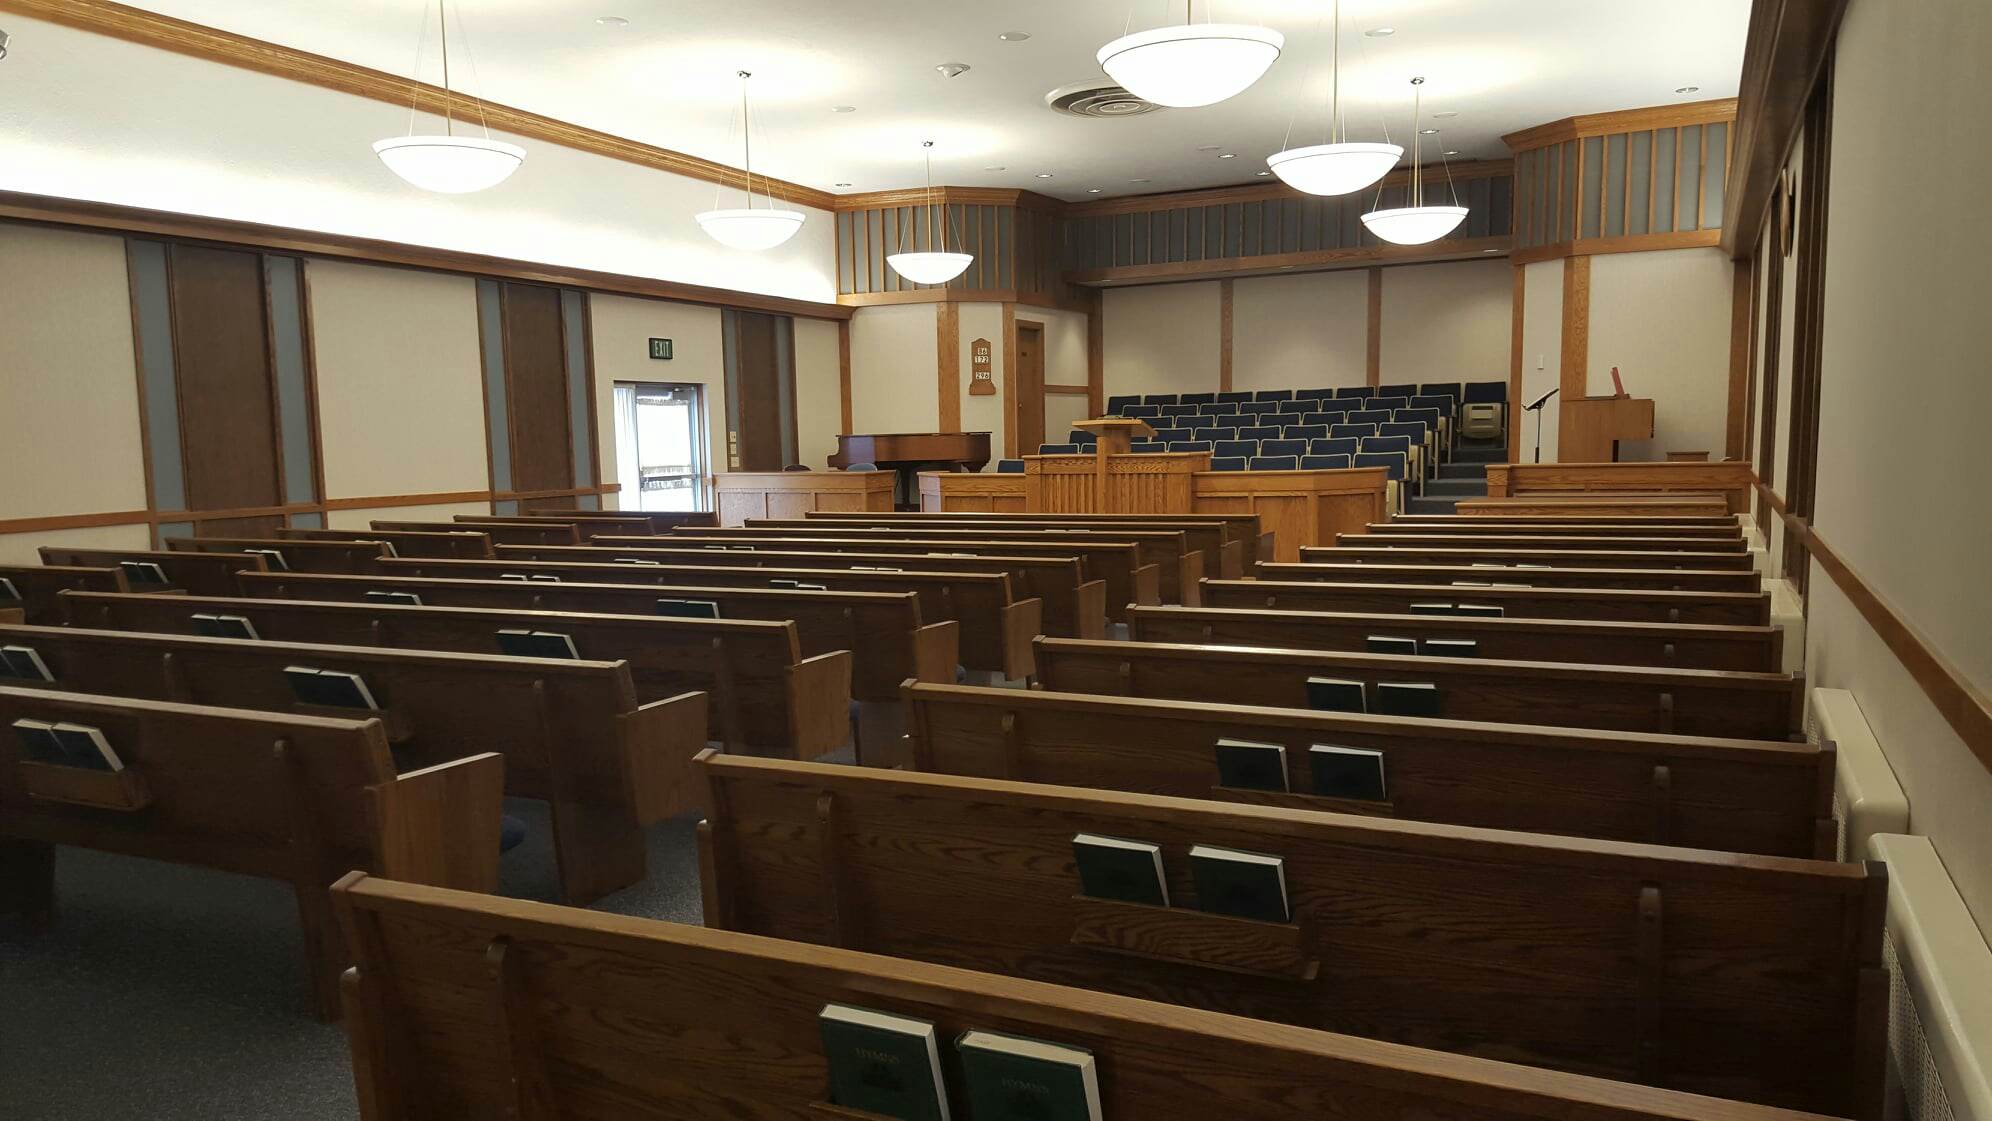 The chapel of the Hawthorne and Quinn Building of The Church of Jesus Christ of Latter-day Saints located at 4010 Hawthorne Road in Pocatello, Idaho.